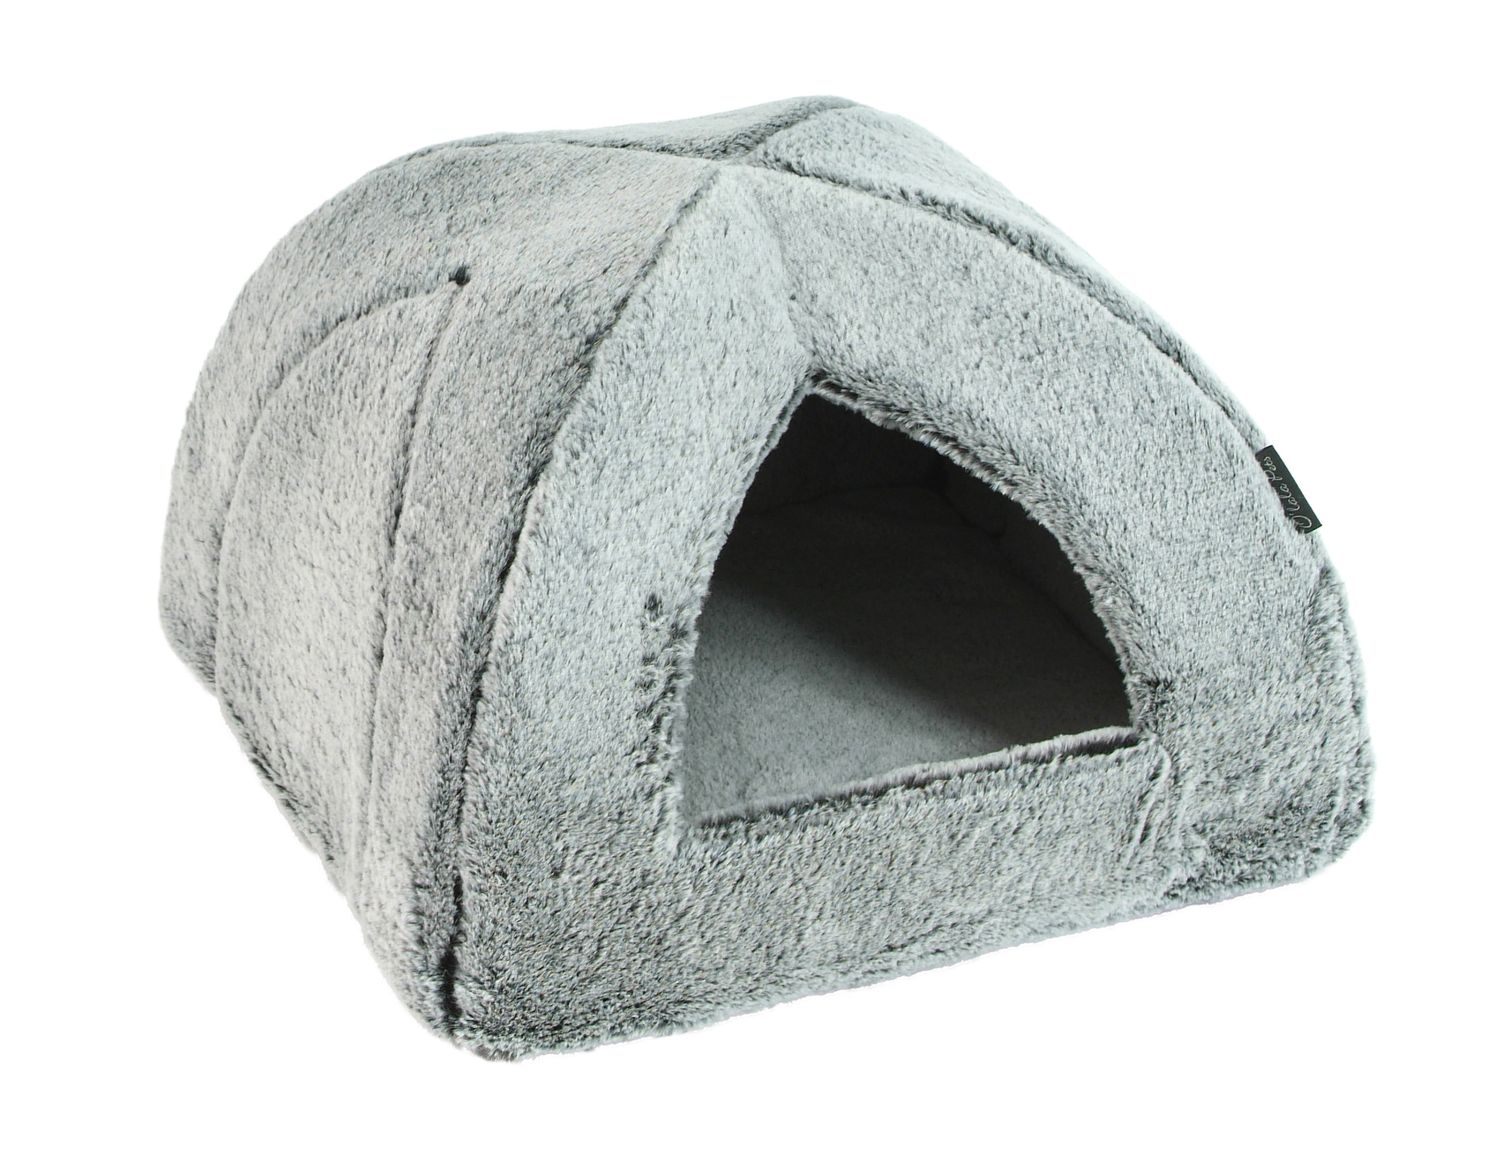 Igloo Royal, Couleur: Grey, Taille: 40x40cm